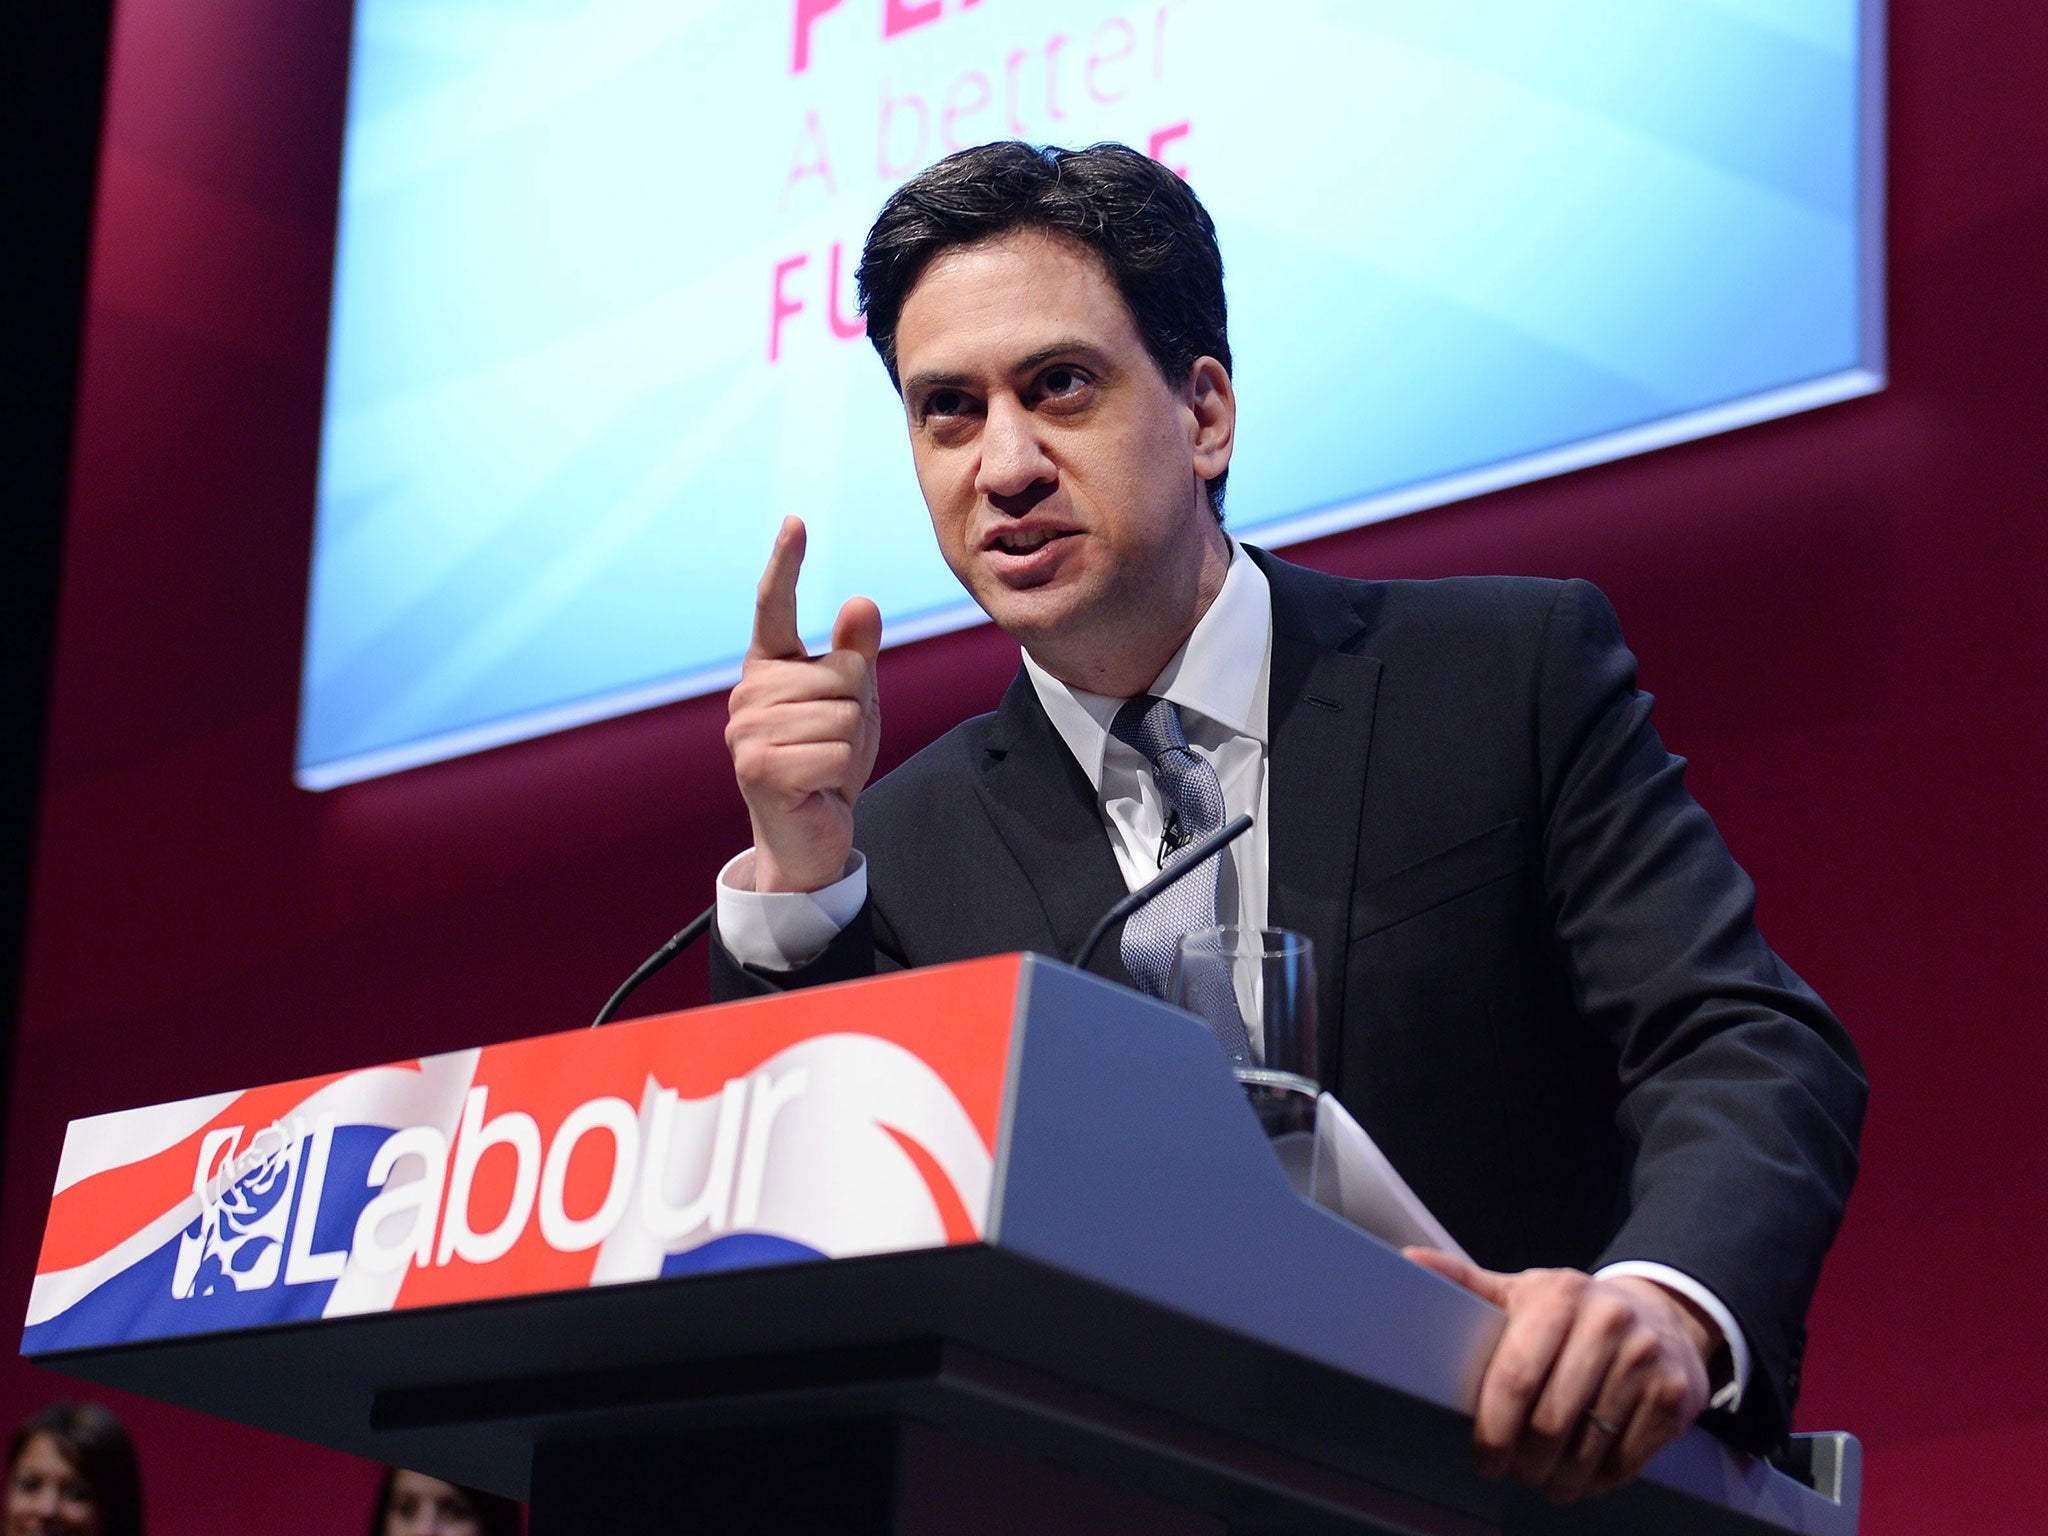 Ed Miliband knows he is in for a tough time from the Conservative-leaning press until polling day